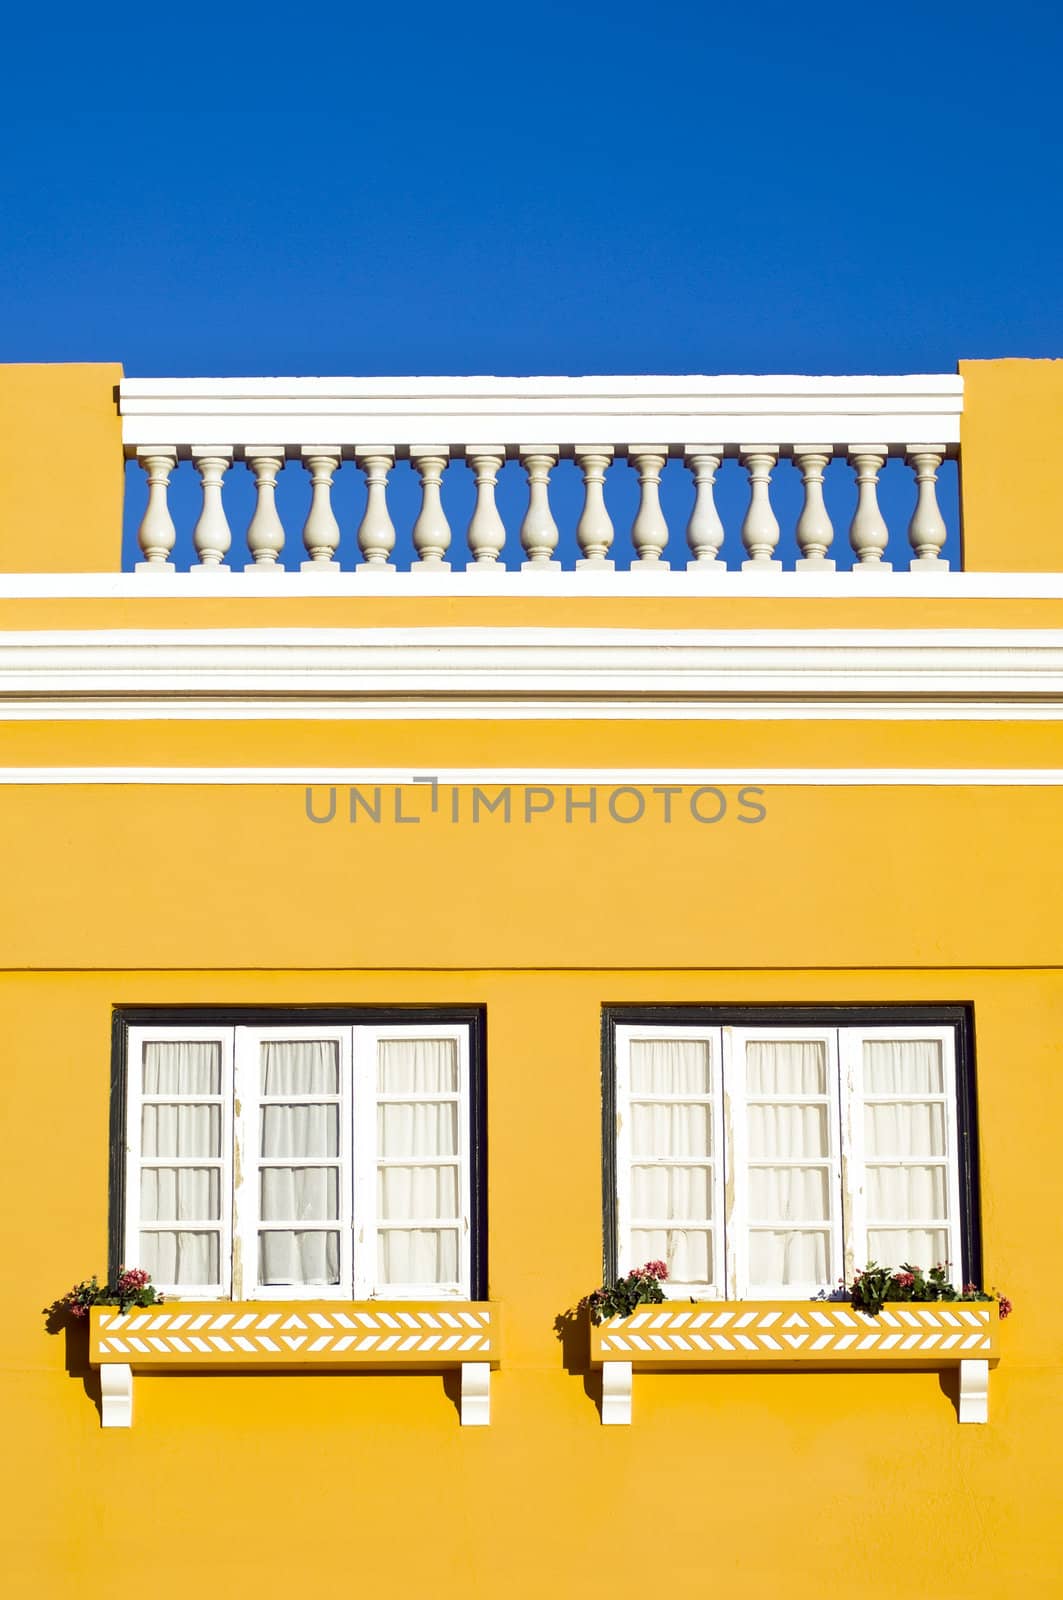 Bright yellow building with square windows